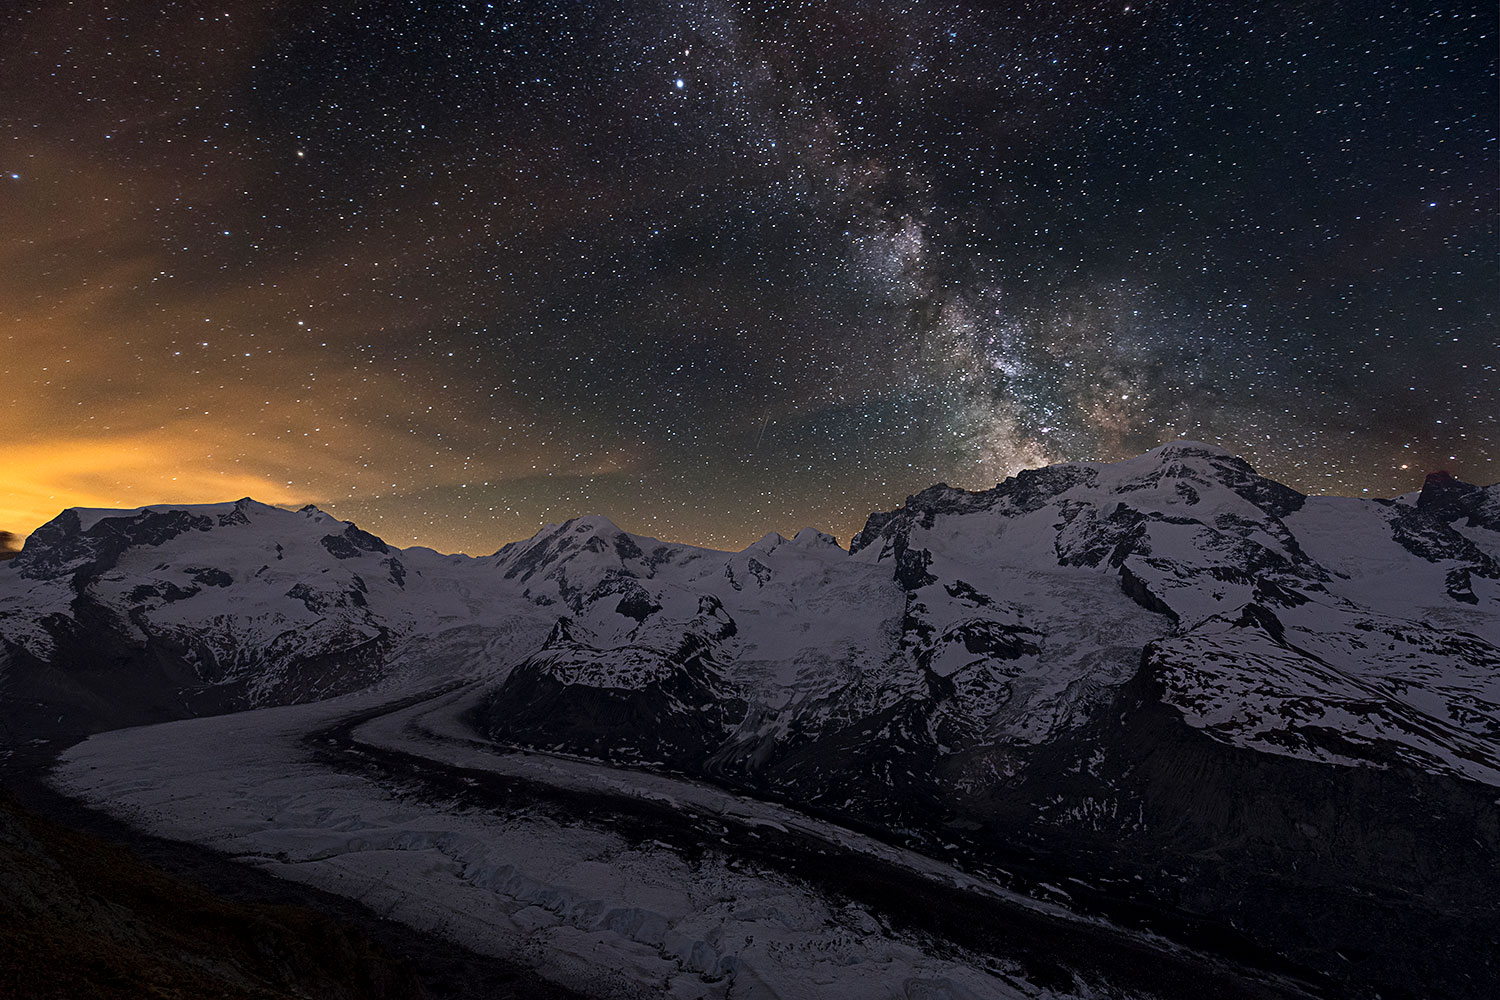 Monte Rosa and Giacchio Gorner with Milky Way...